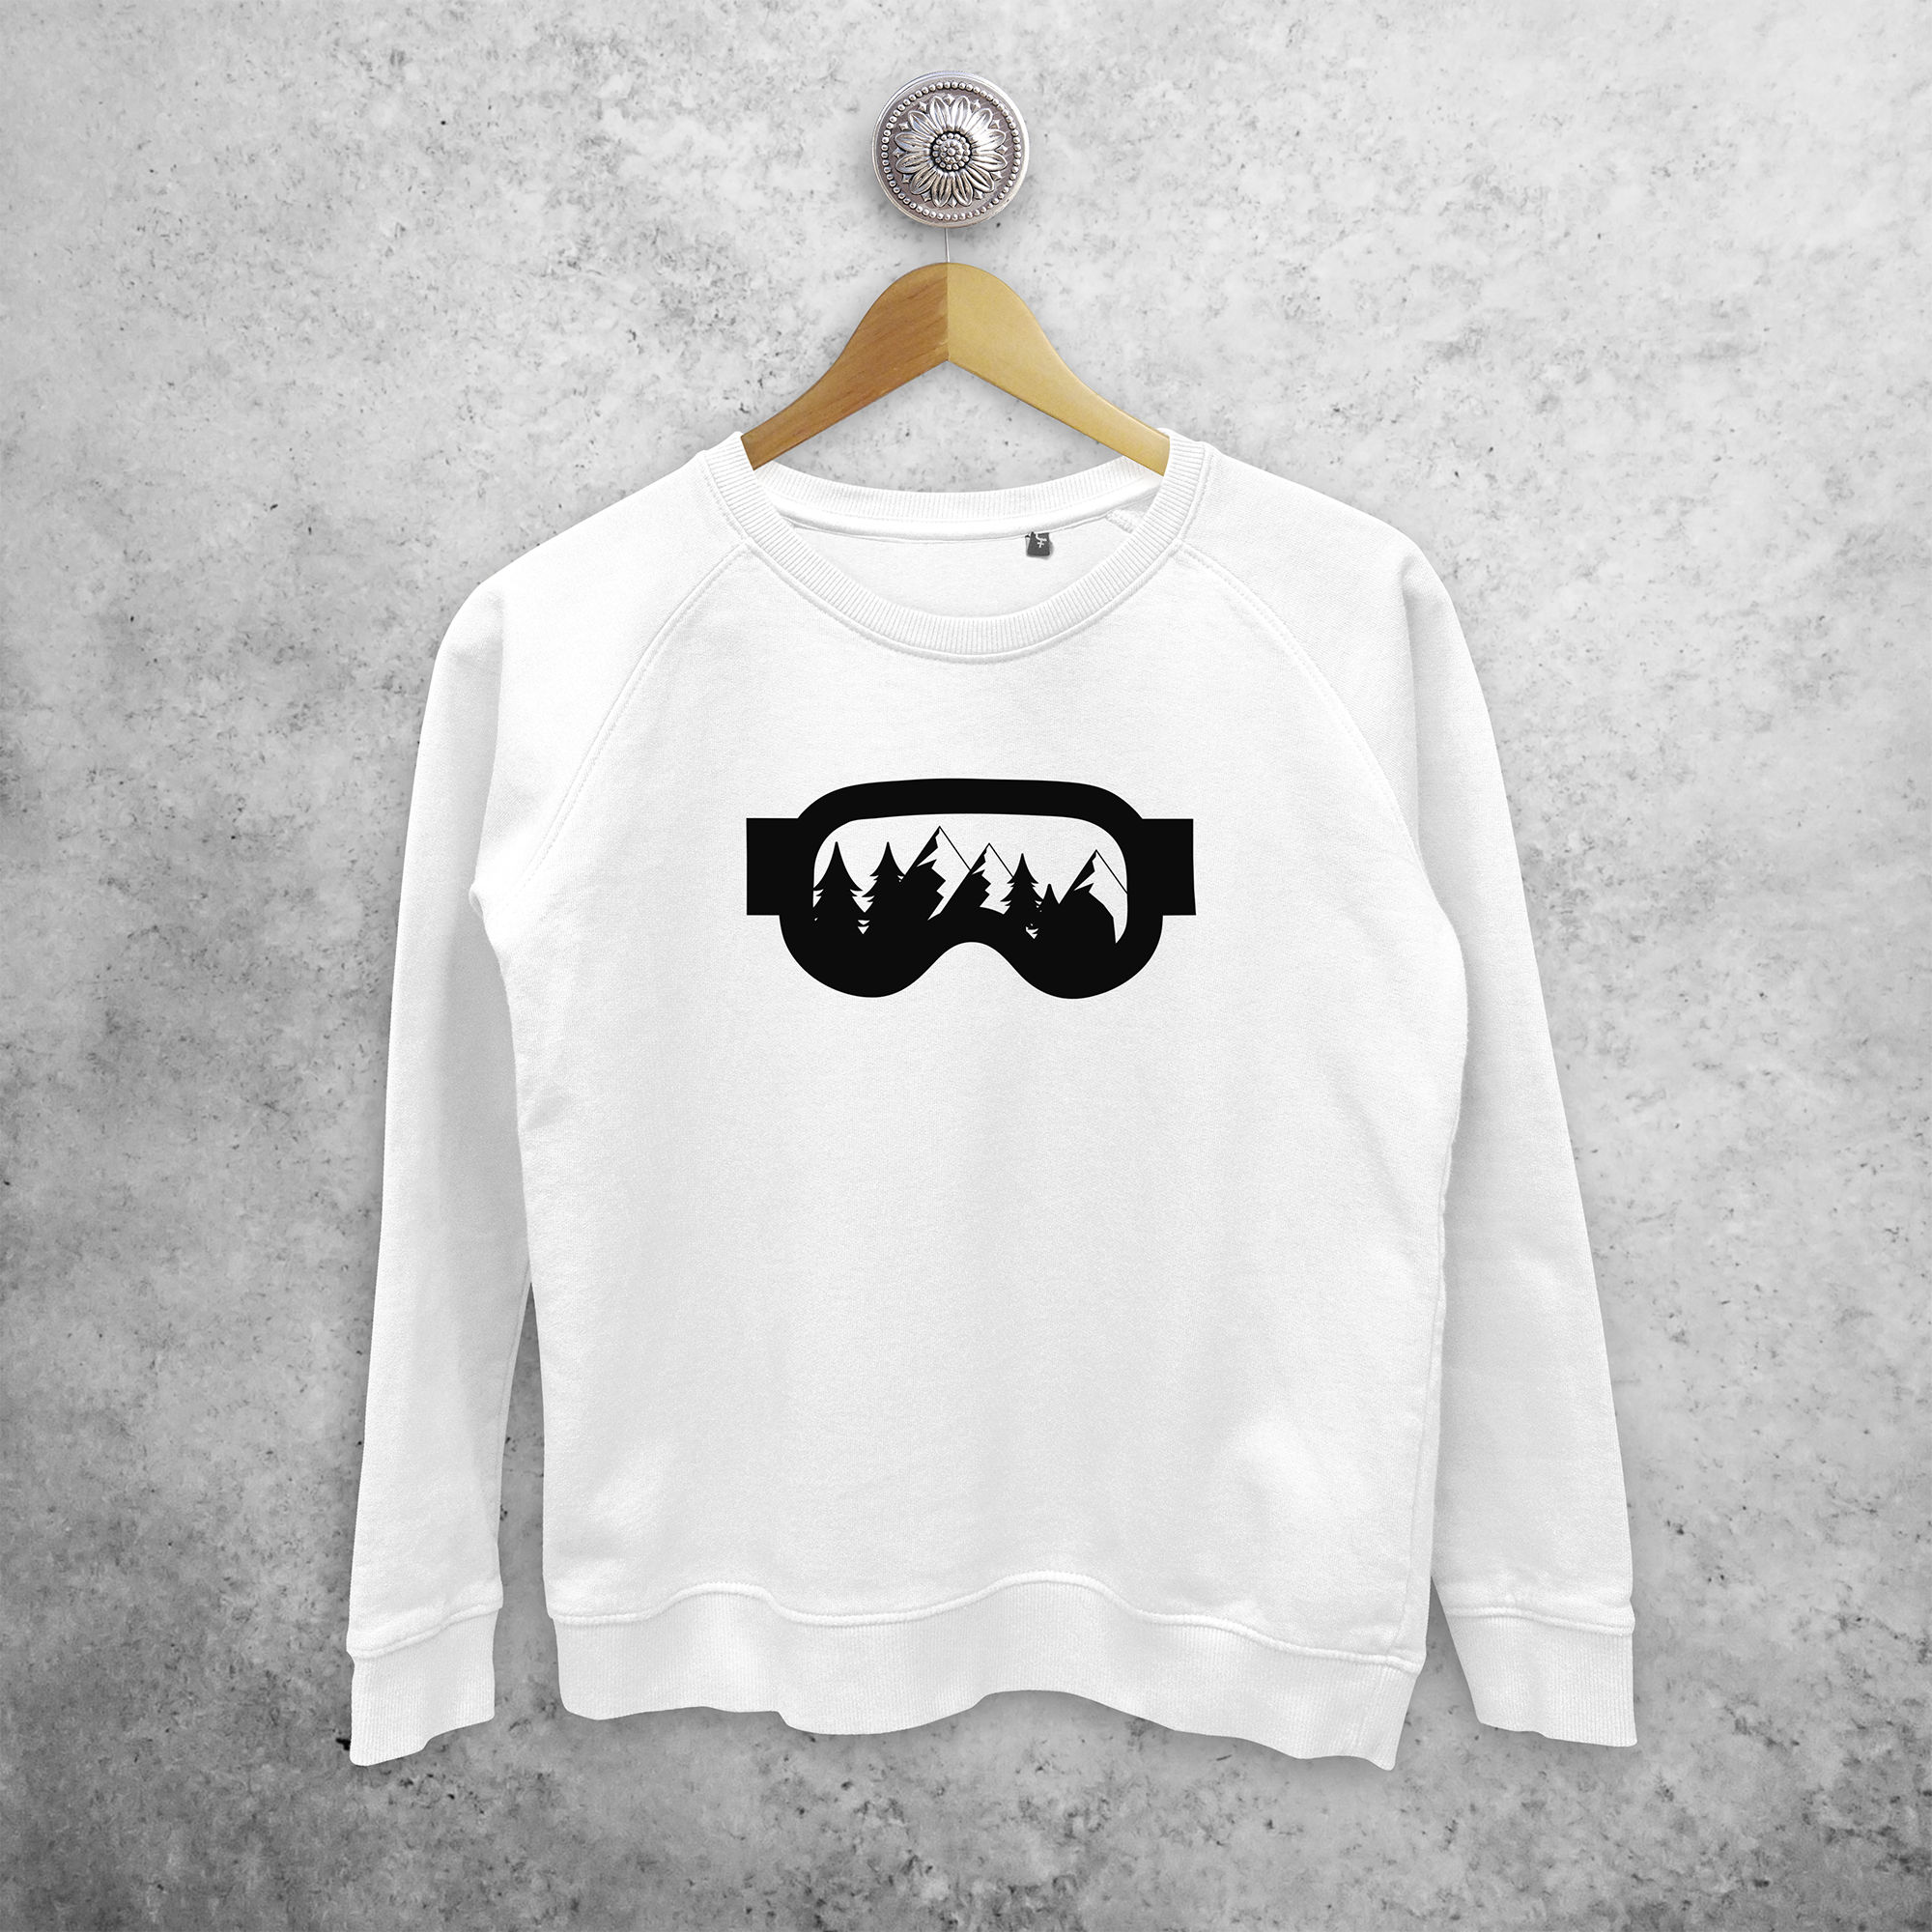 Adult sweater, with ski goggles print by KMLeon.